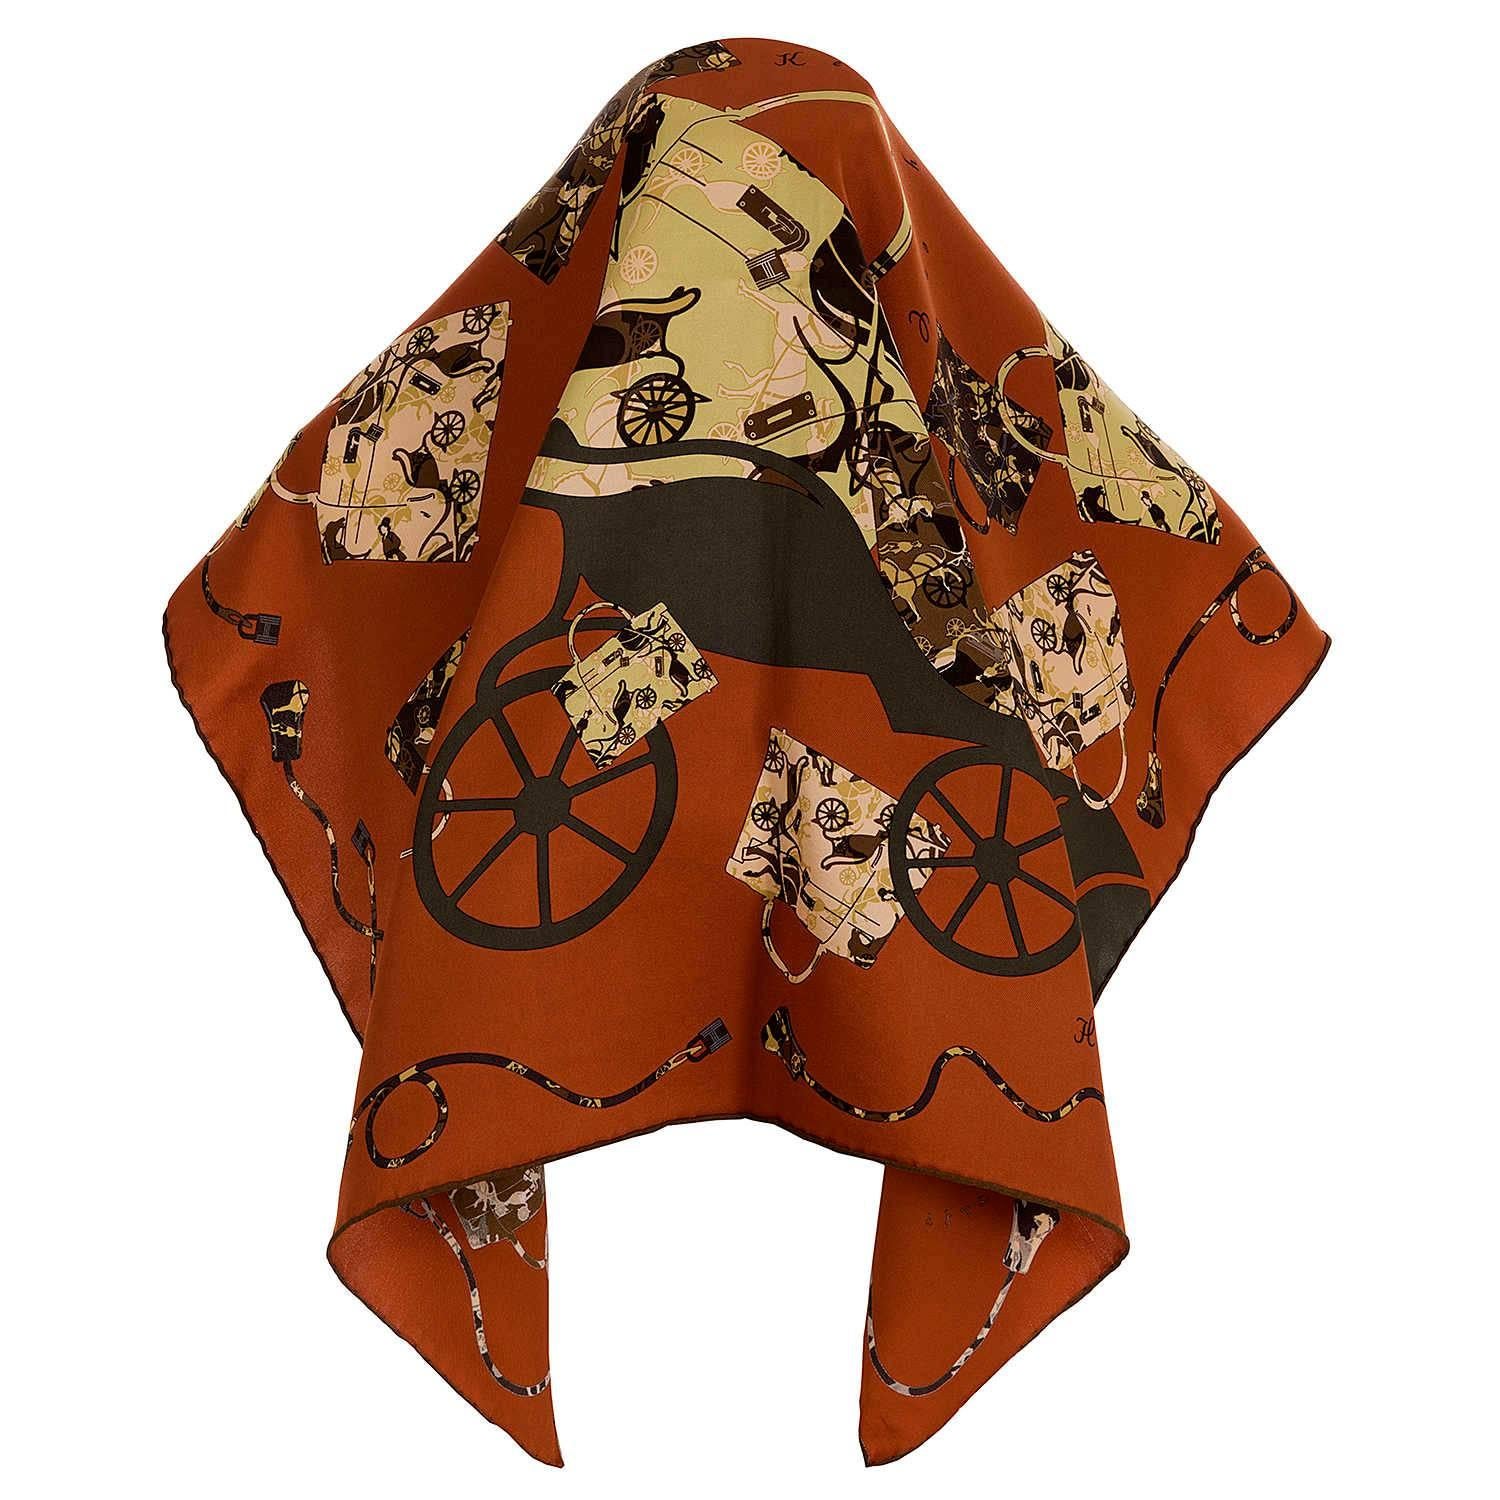 If you own an Hermes Kelly bag, then this stunning Hermes silk scarf is a must for you. 'Kelly en Caleche' designed by Cyrille Diatkine in 2007, pays homage to the legendary Kelly bag and the famous Hermes 'Horse & Carriage'. The scarf has been